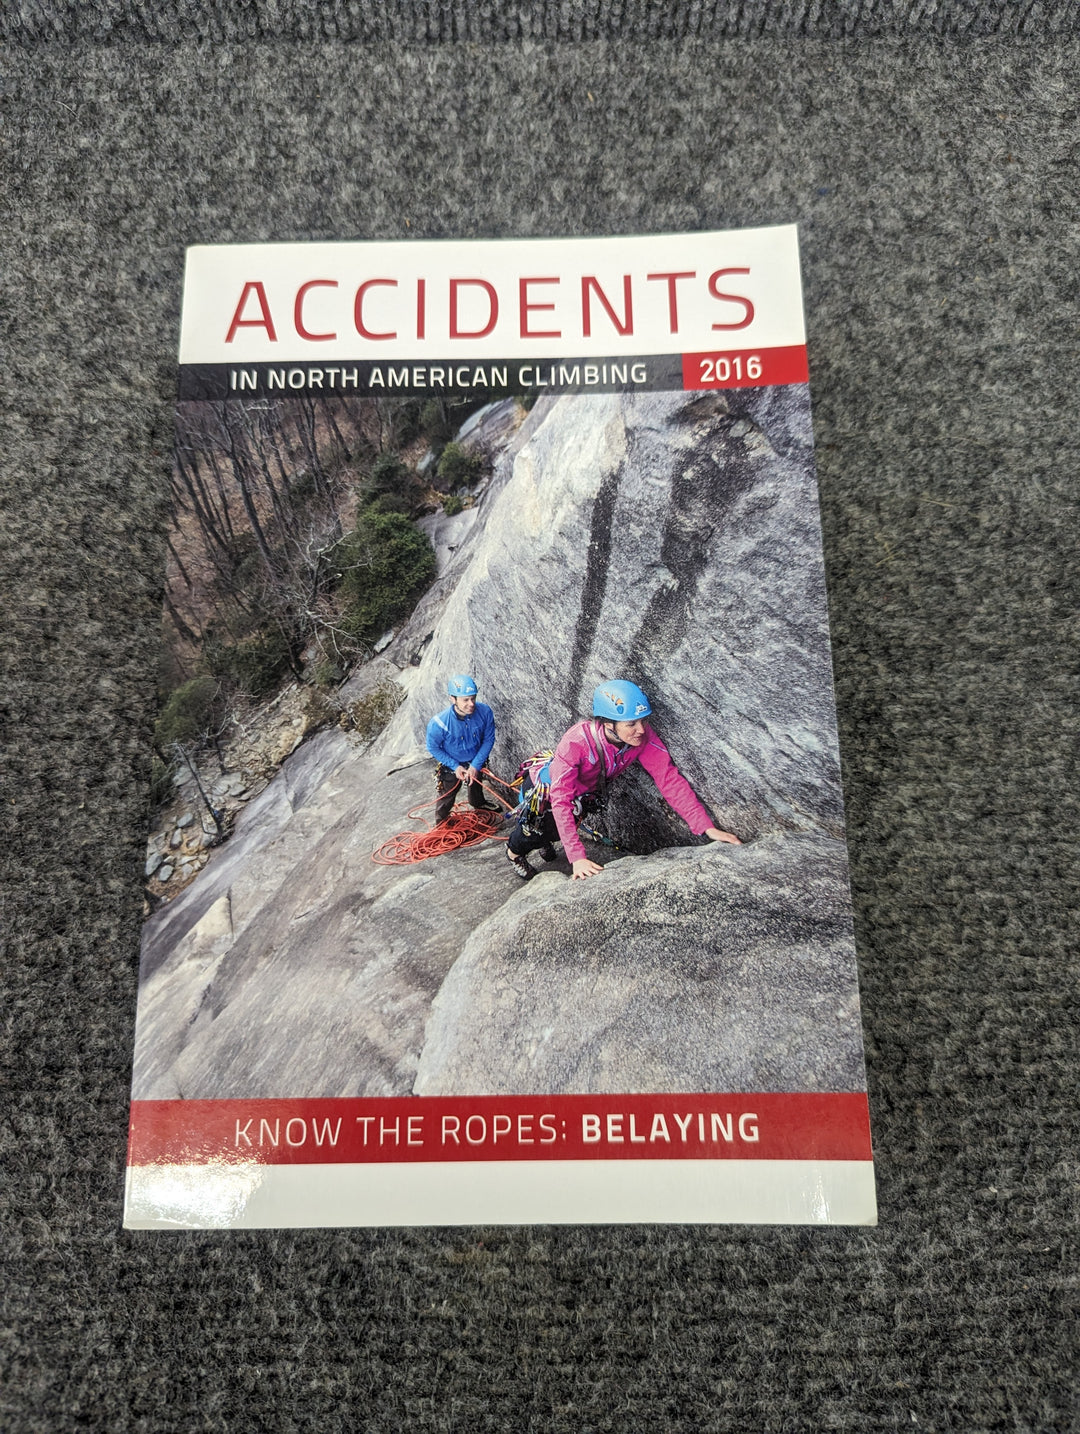 Accidents in North American Climbing 2016